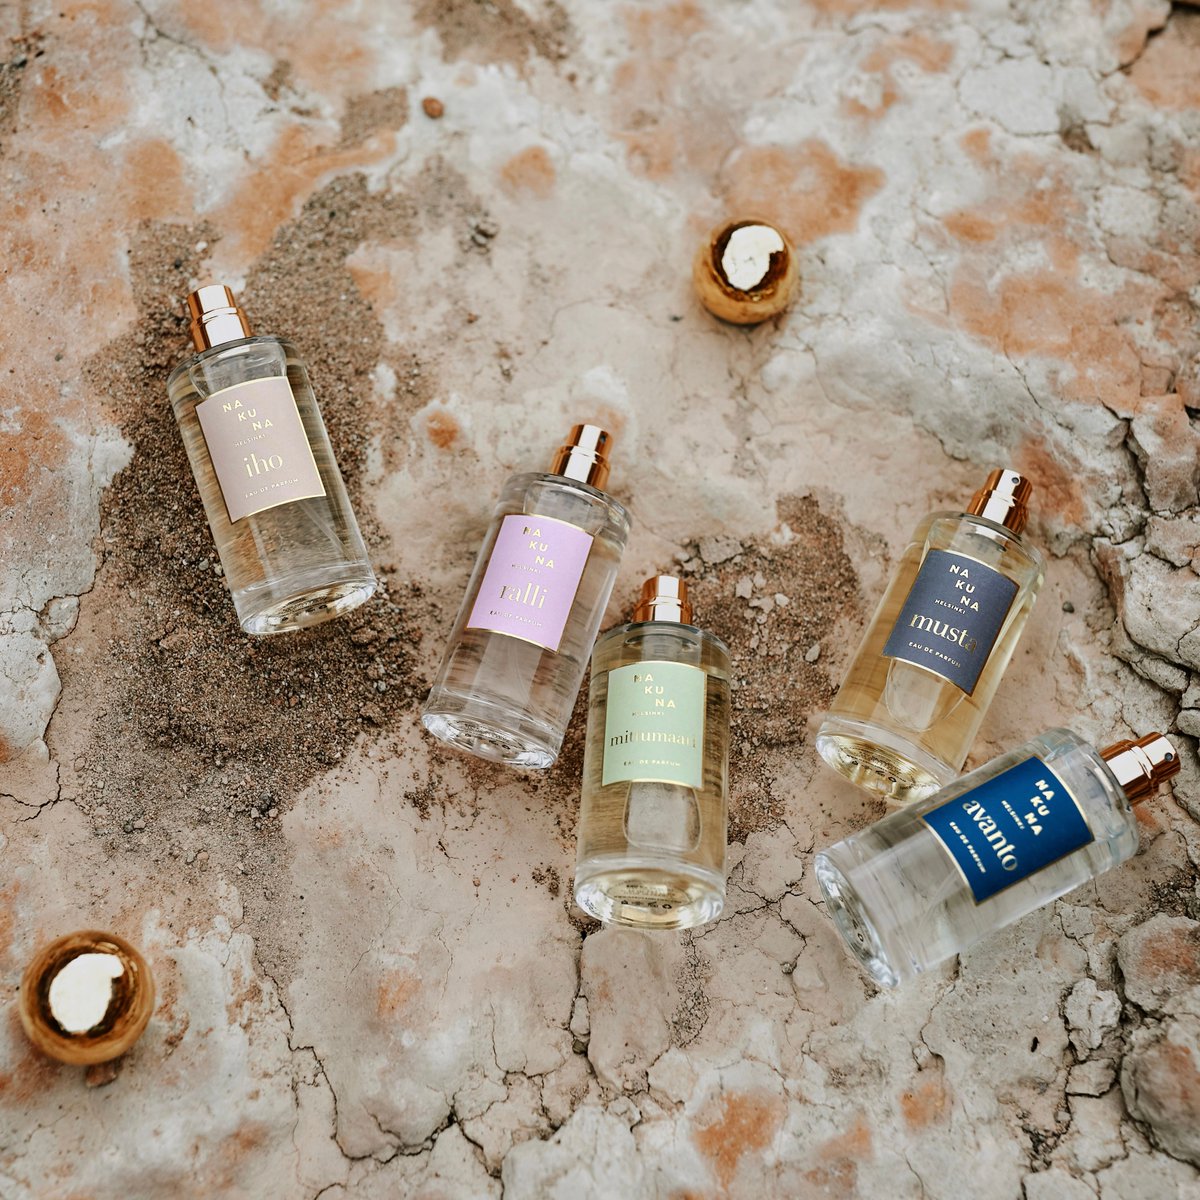 Fine fragrances twisted with a Nordic mindset. Nakuna Helsinki is created through sensing all around. Hearing the noises and seeing the chaos. Exploring the scents, tastes and colours. Dreaming, imagining, creating. That is what Nakuna Helsinki is all about. https://t.co/Uv9yufE8oR